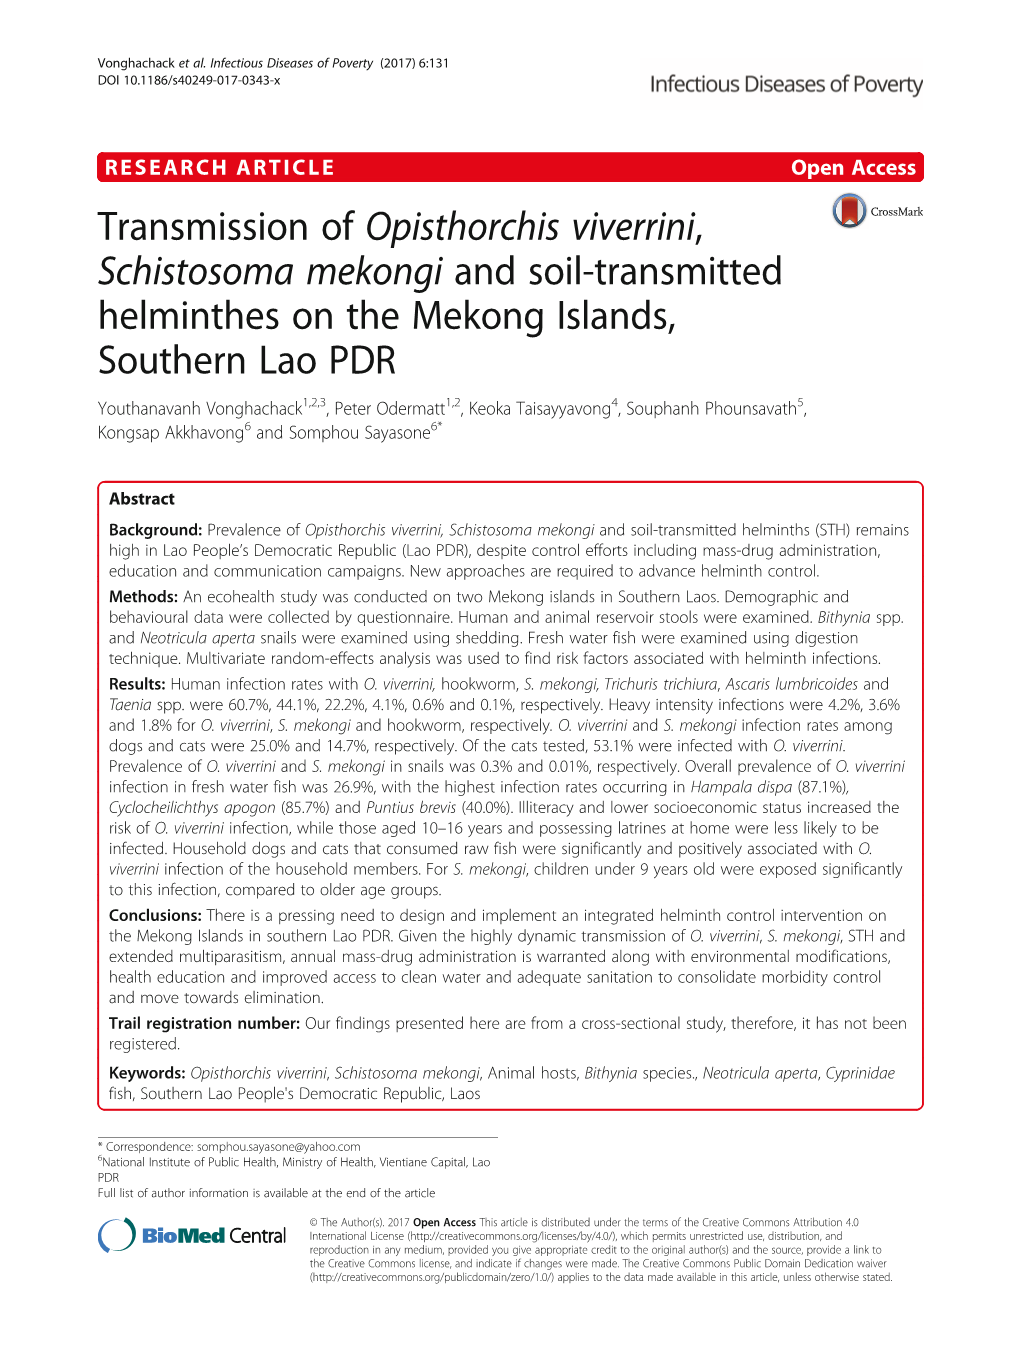 Transmission of Opisthorchis Viverrini, Schistosoma Mekongi and Soil-Transmitted Helminthes on the Mekong Islands, Southern